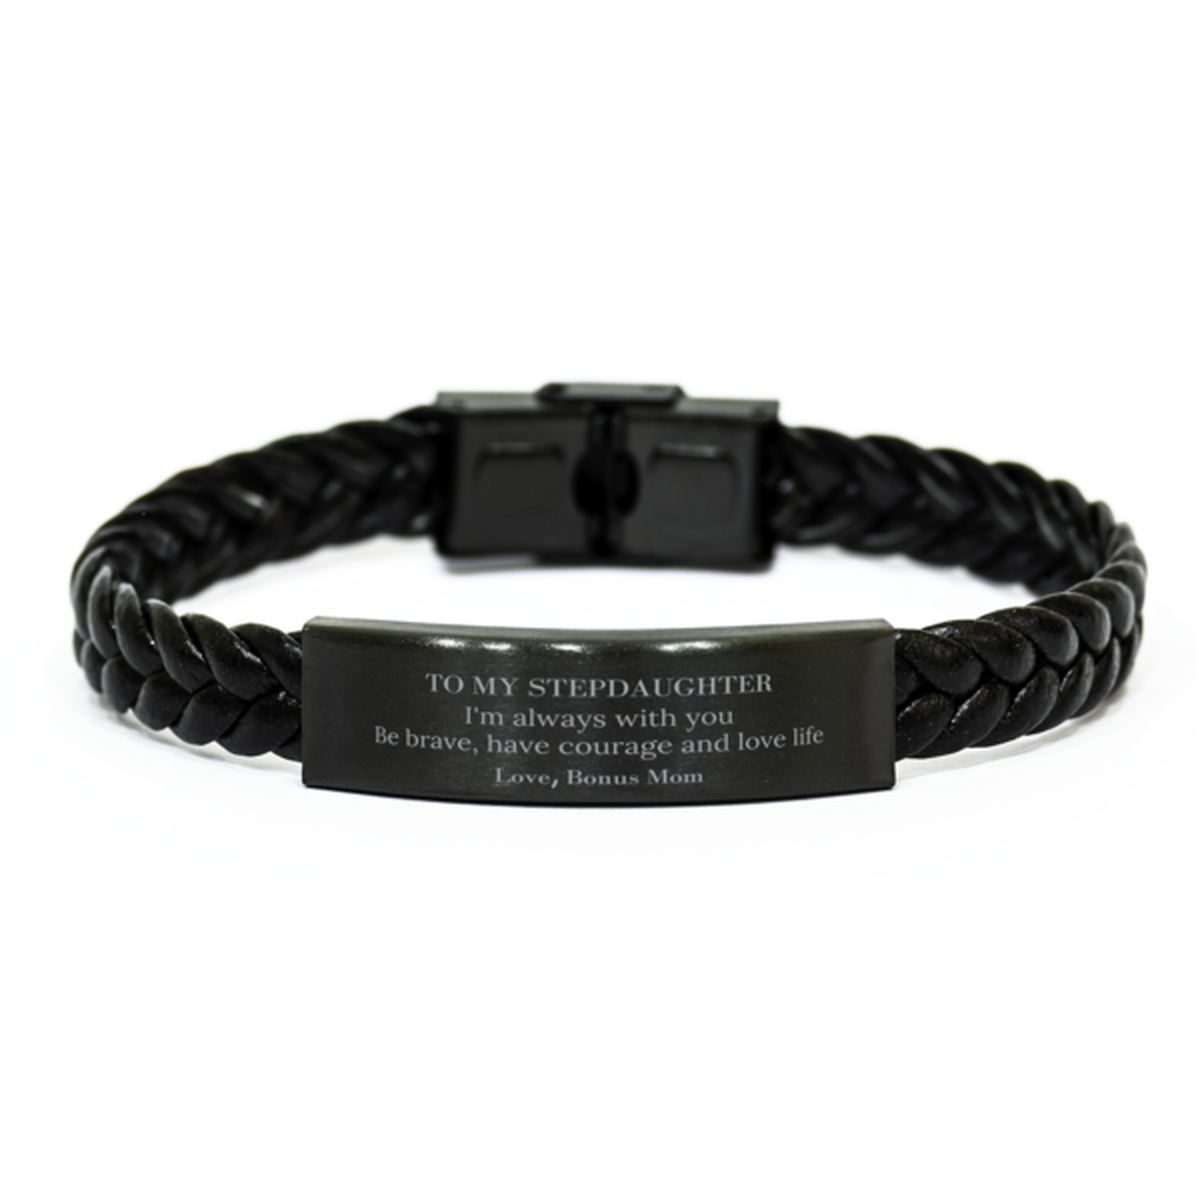 To My Stepdaughter Gifts from Bonus Mom, Unique Braided Leather Bracelet Inspirational Christmas Birthday Graduation Gifts for Stepdaughter I'm always with you. Be brave, have courage and love life. Love, Bonus Mom